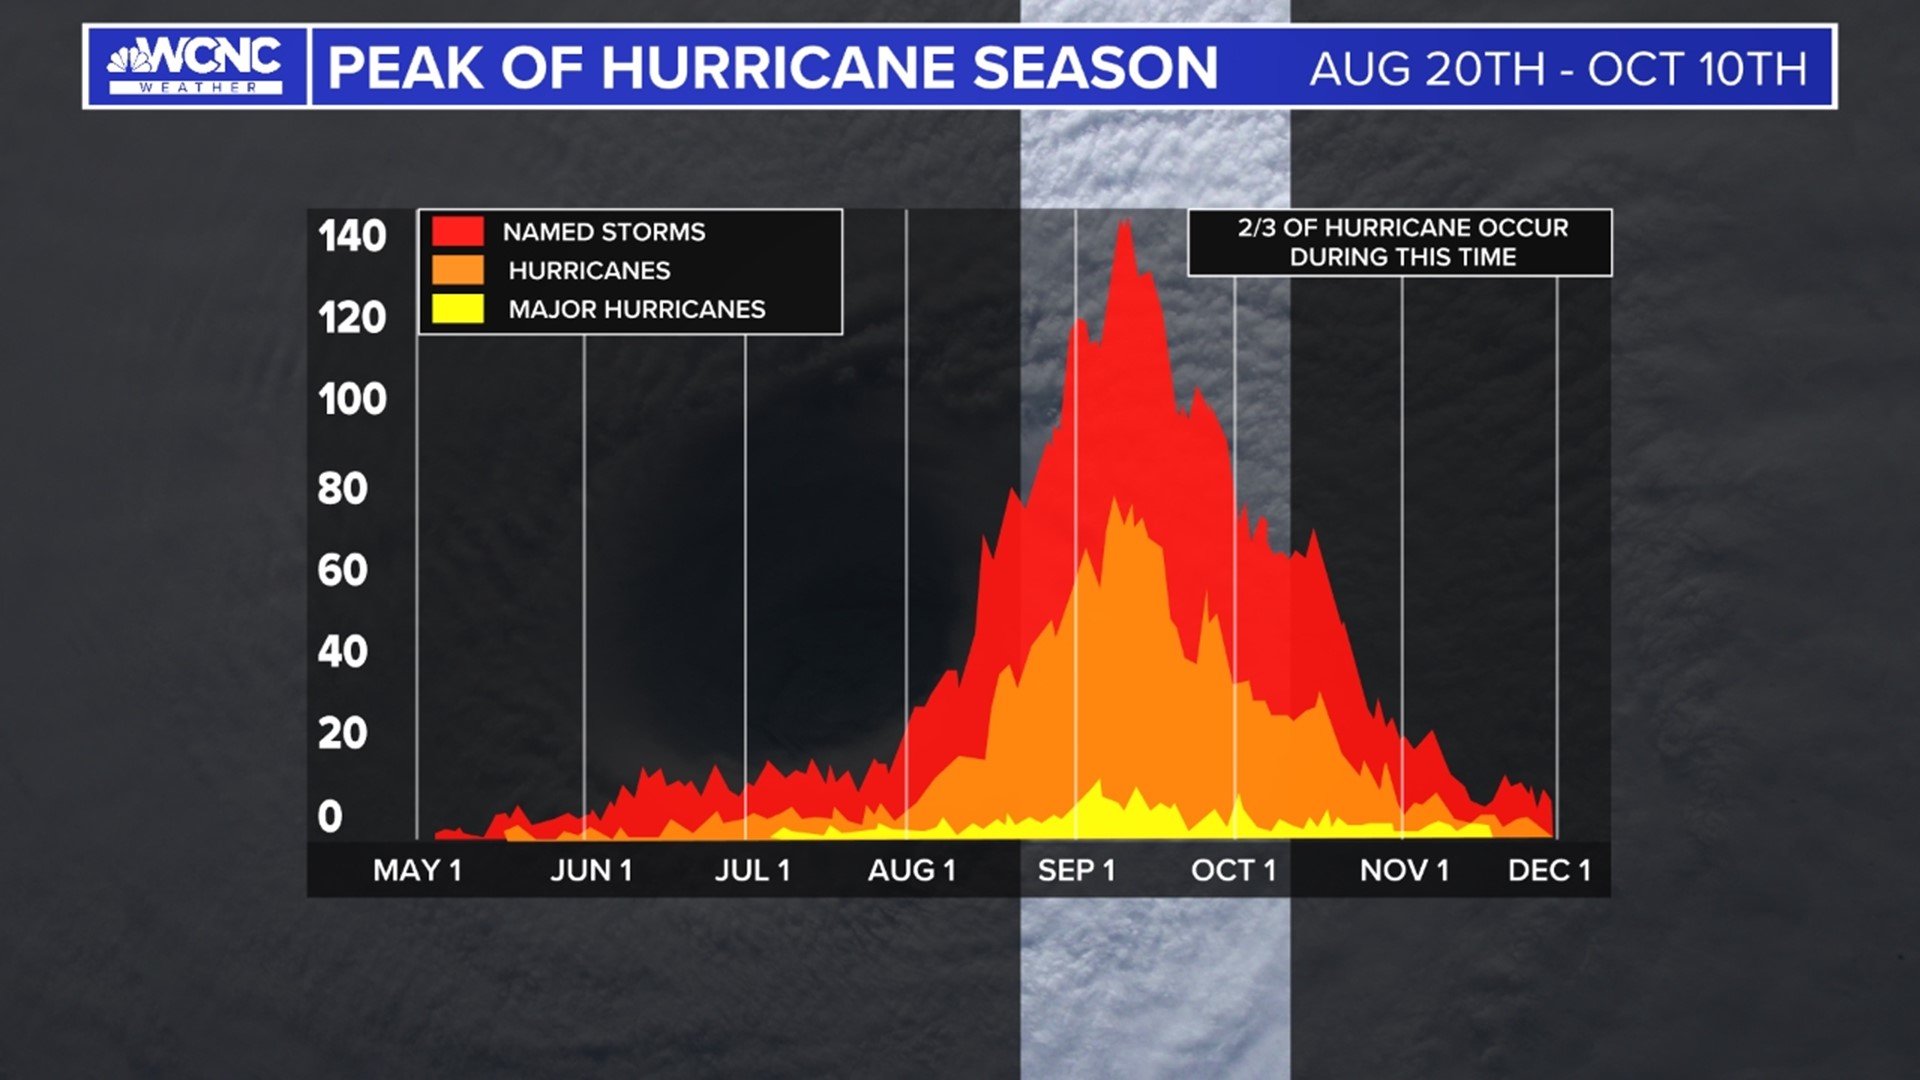 What month is the most active during hurricane season?